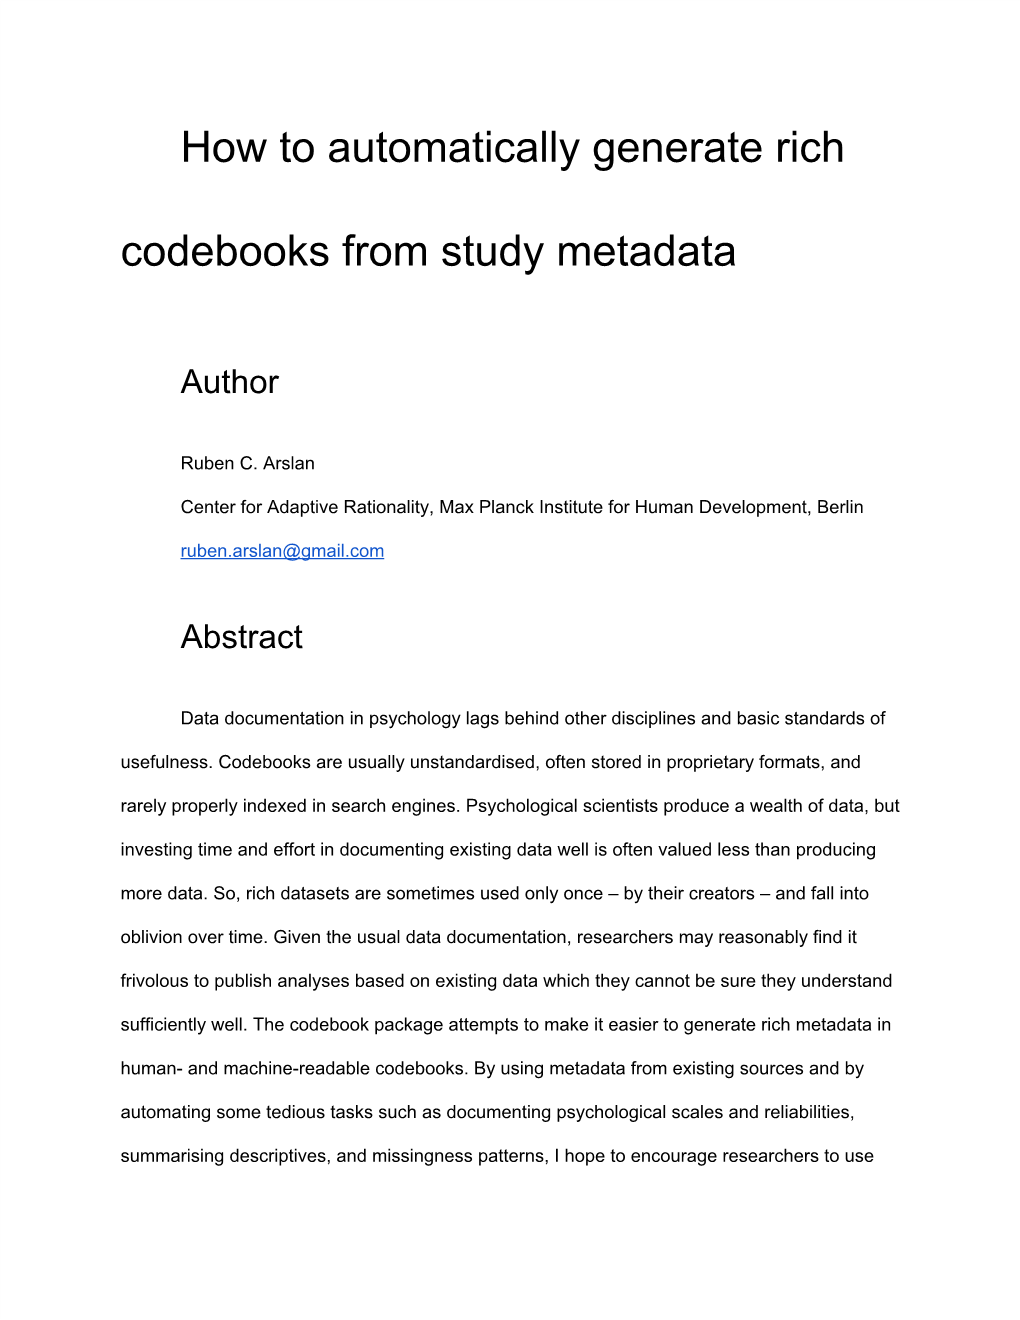 How to Automatically Generate Rich Codebooks from Study Metadata